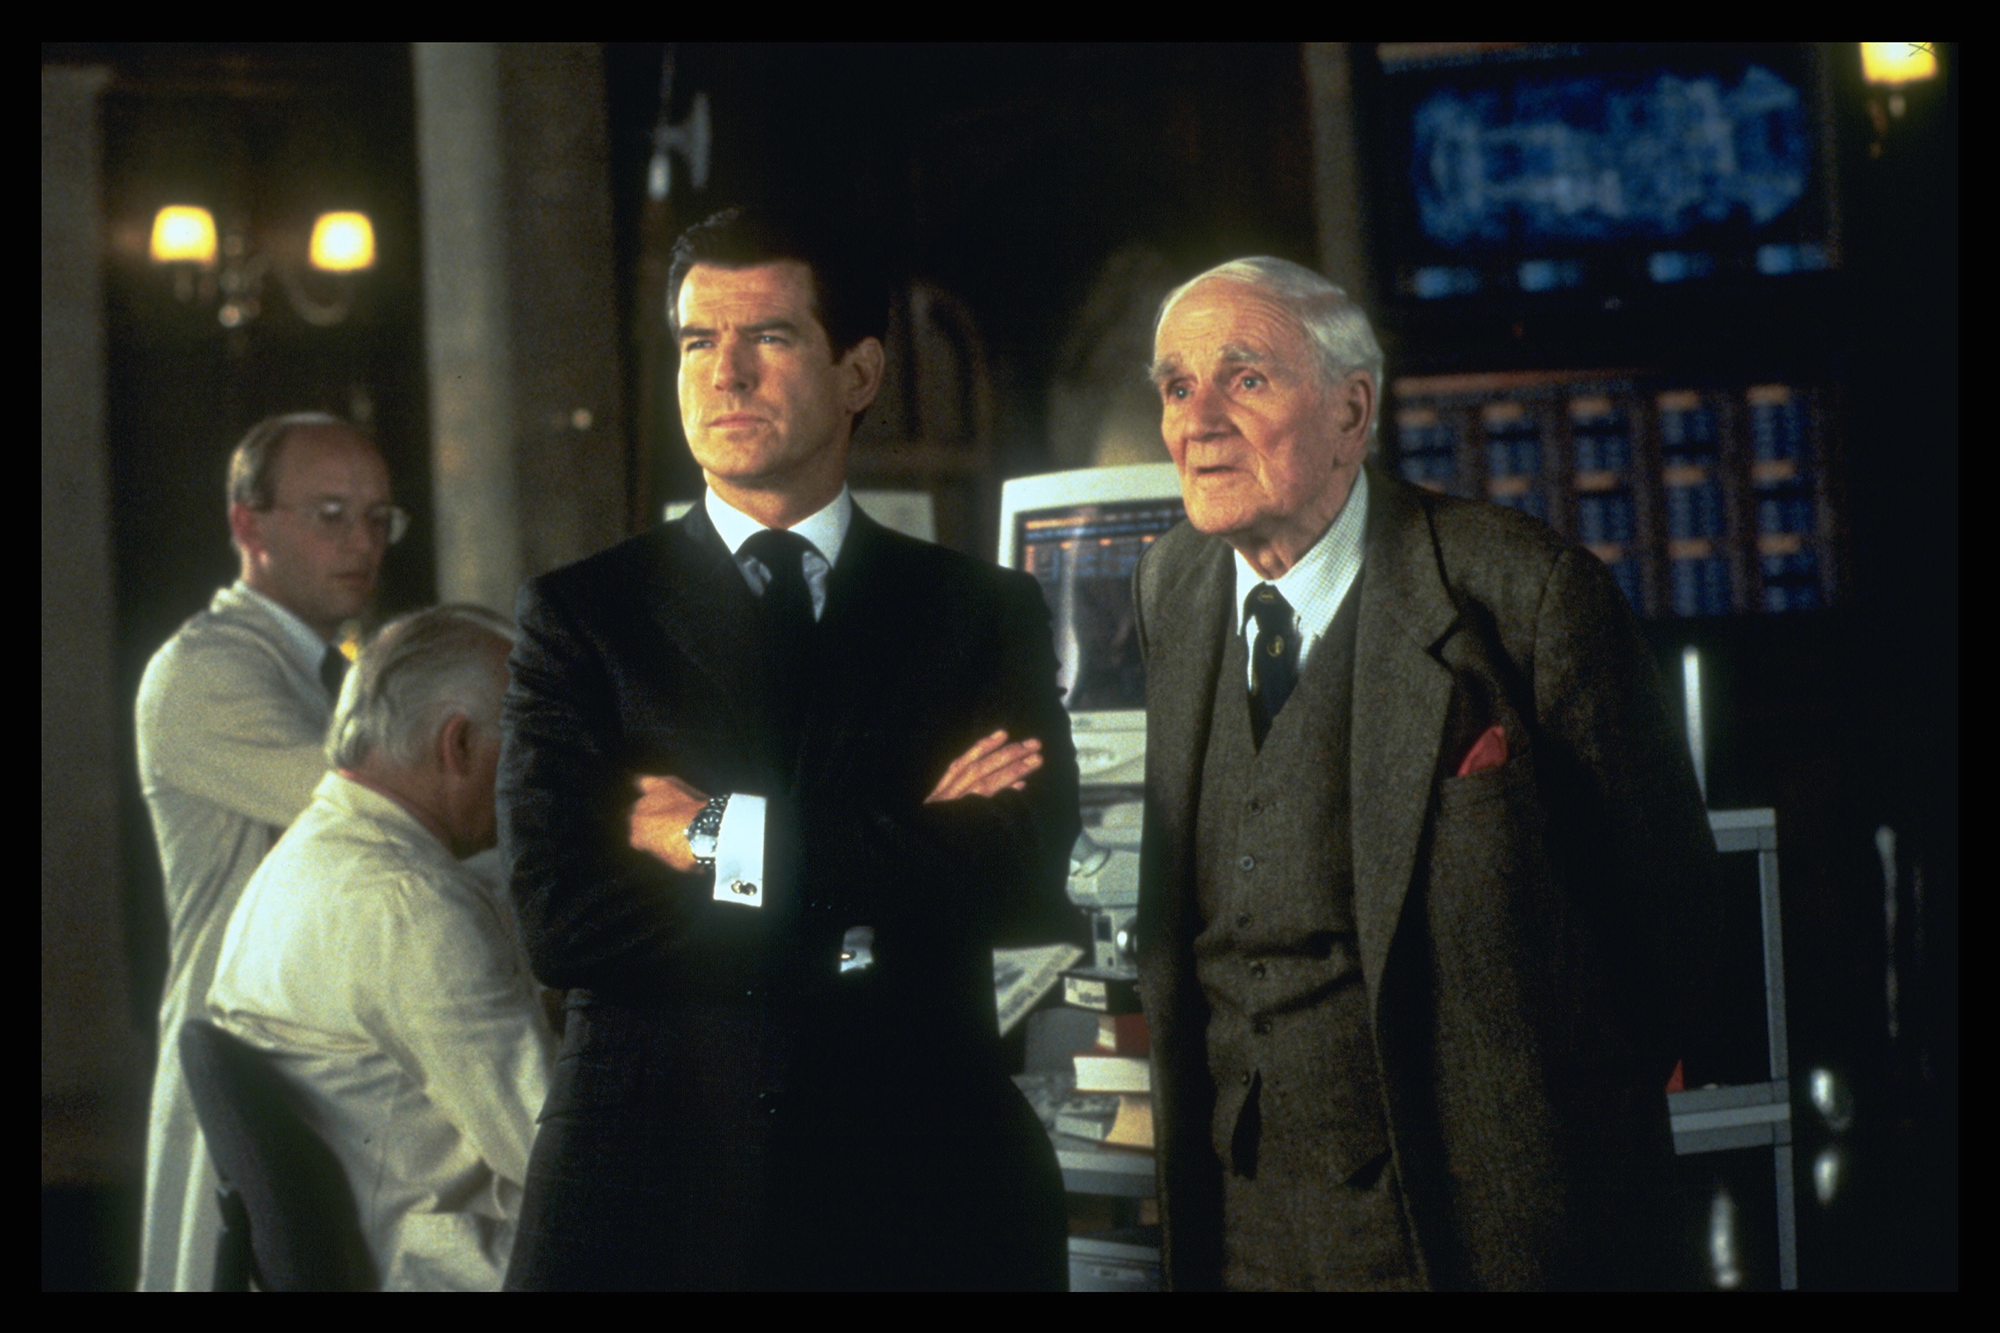 original caption pierce brosnan and desmond llewelyn photo by keith hamsheresygma via getty images